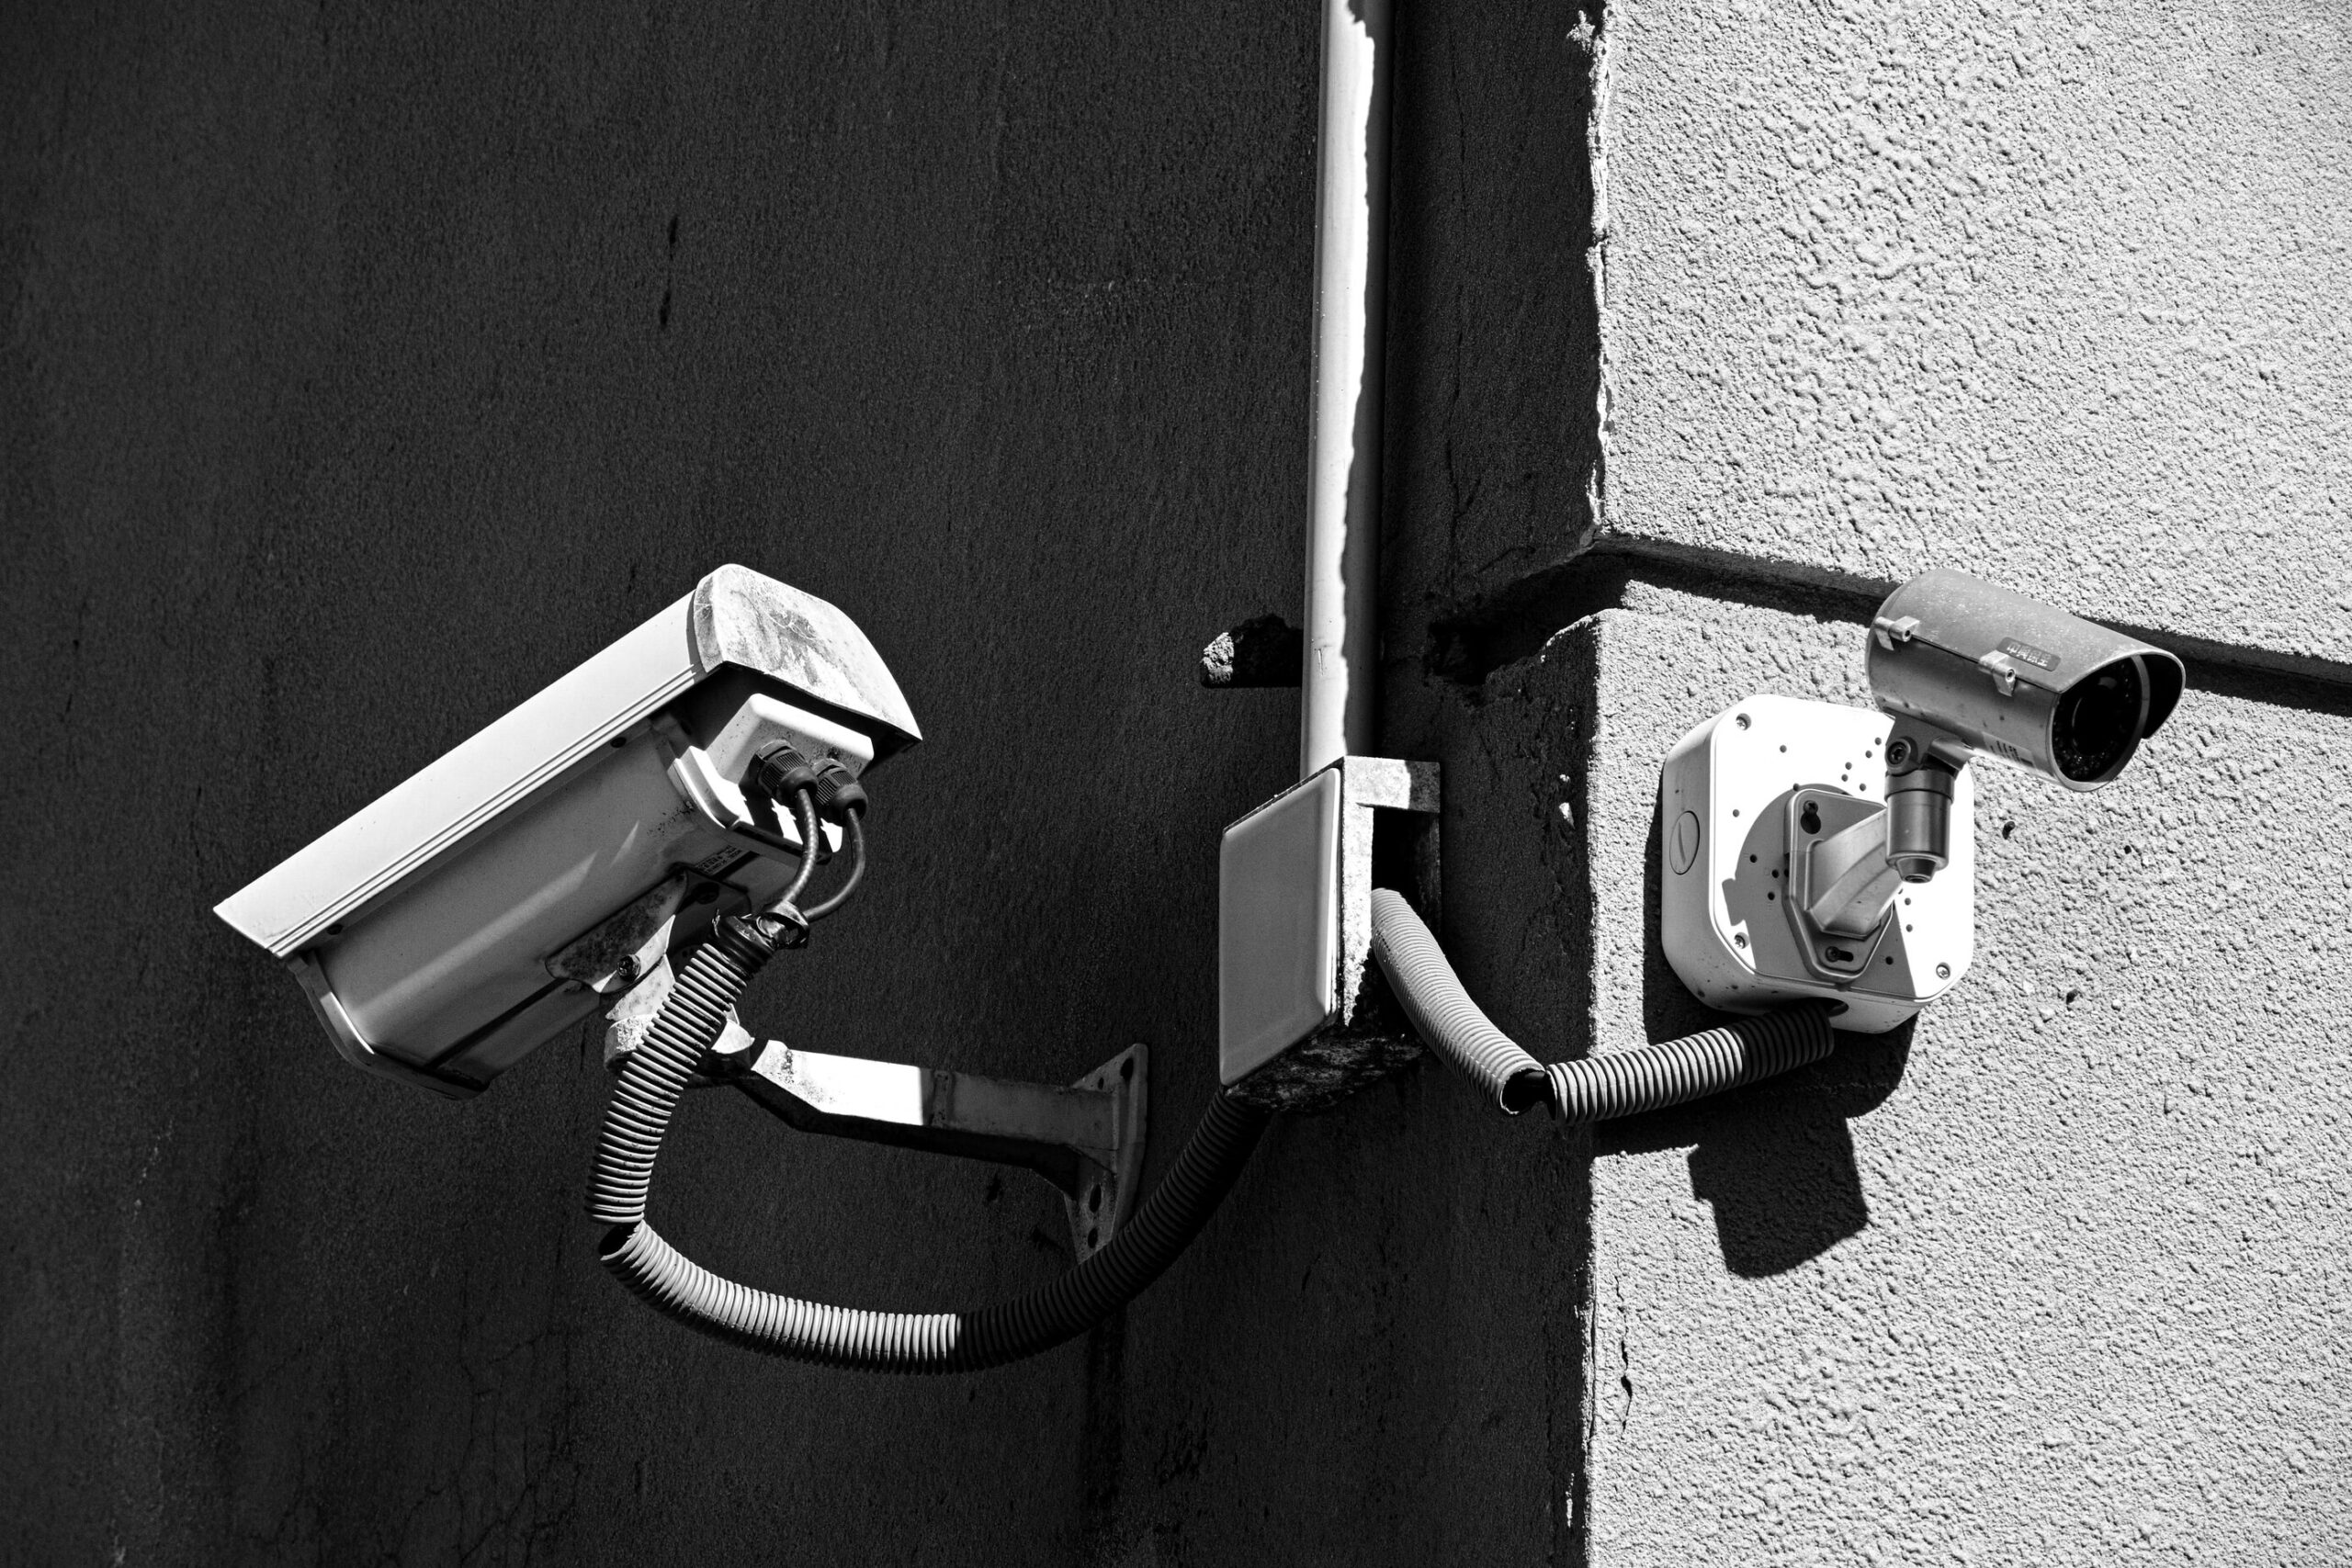 Security cameras without WiFi